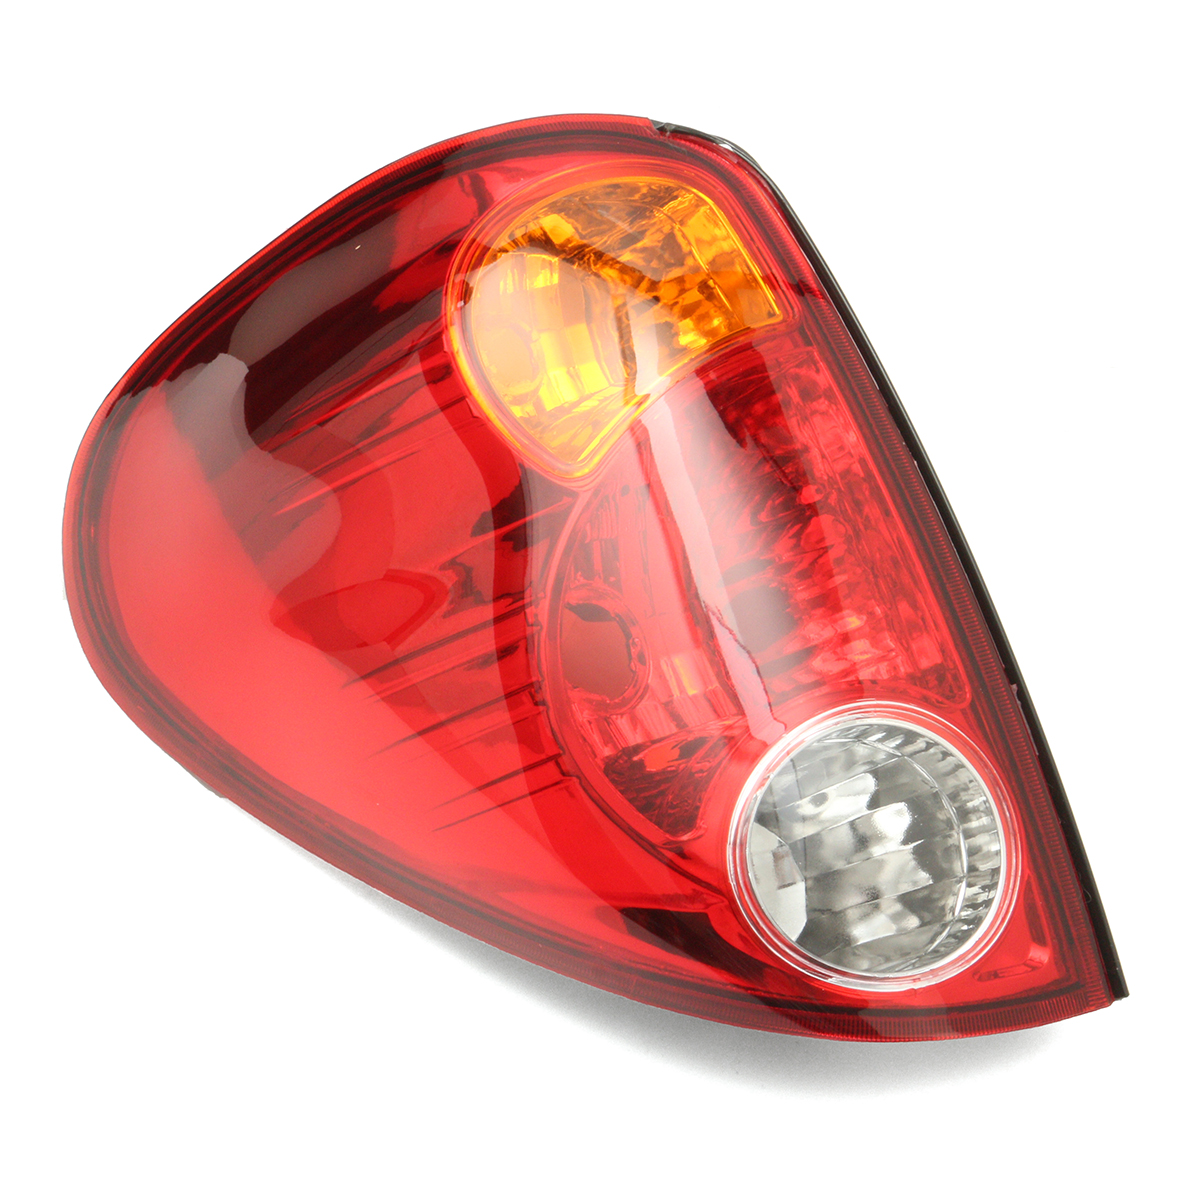 

Car Rear Left Tail Light Lamp Red Lens with No Bulb For Mitsubishi L200 Pickup 2006-Up